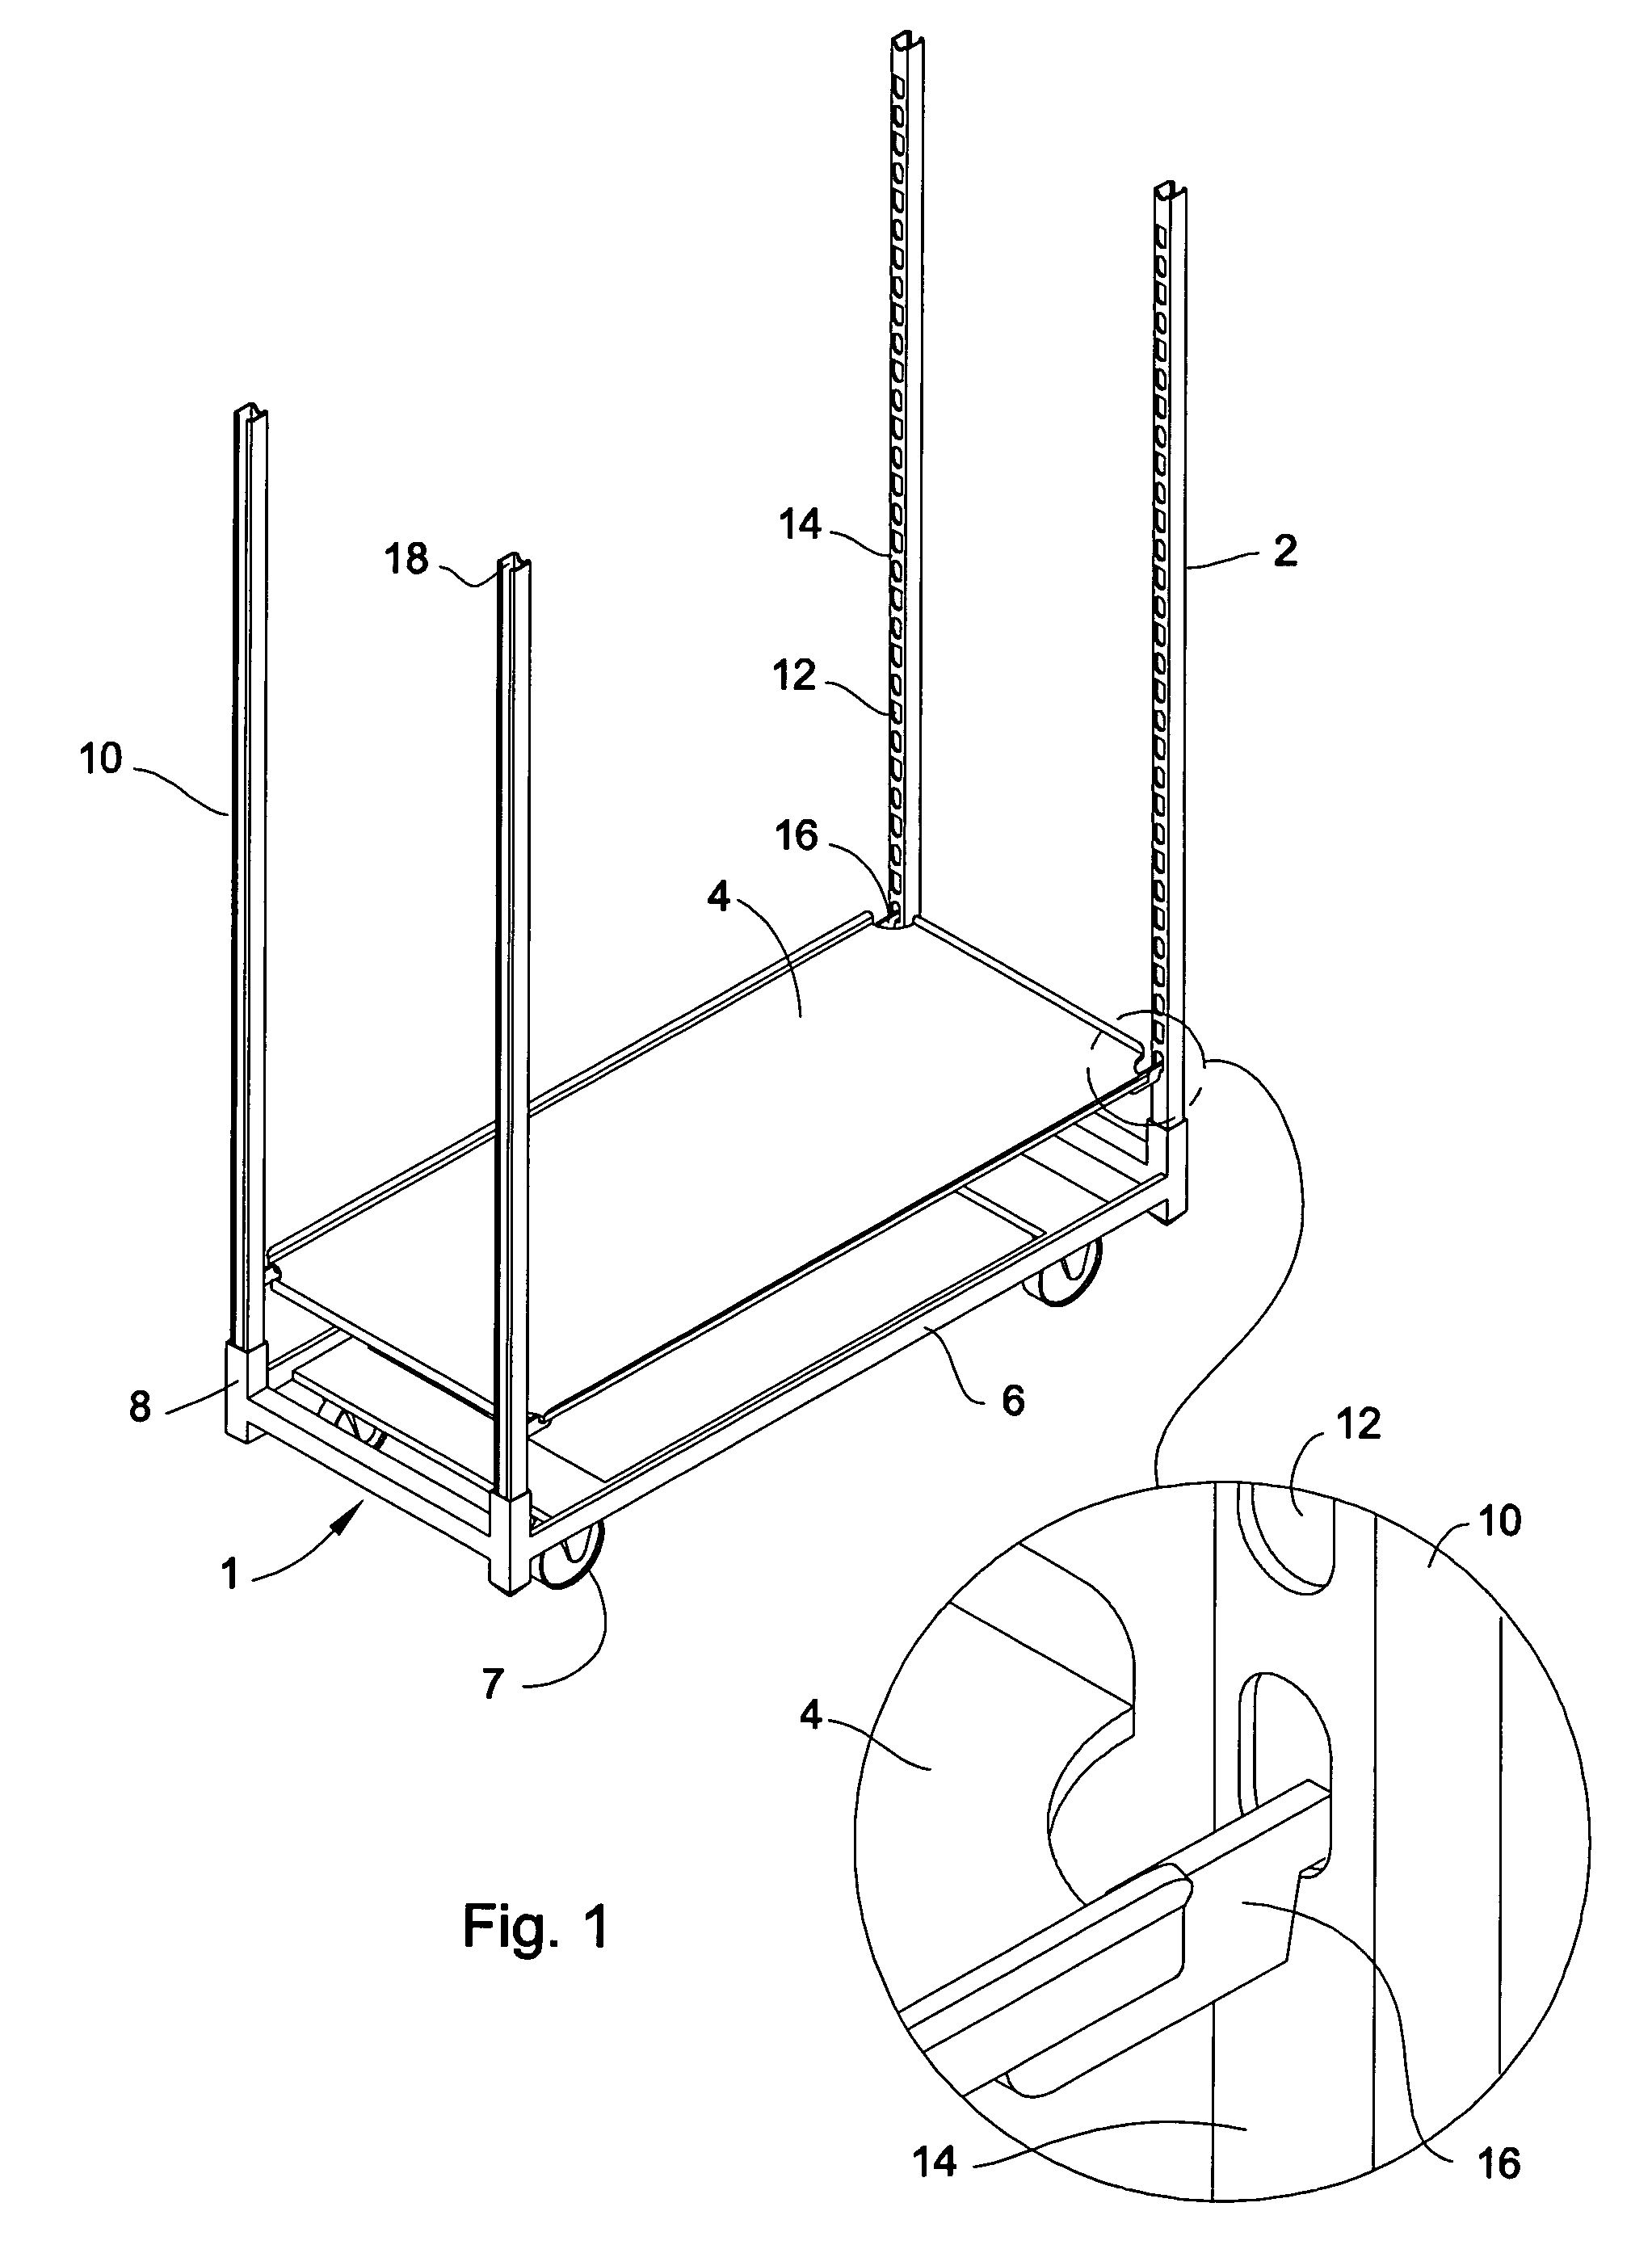 Apparatus and method for assembling shelving units